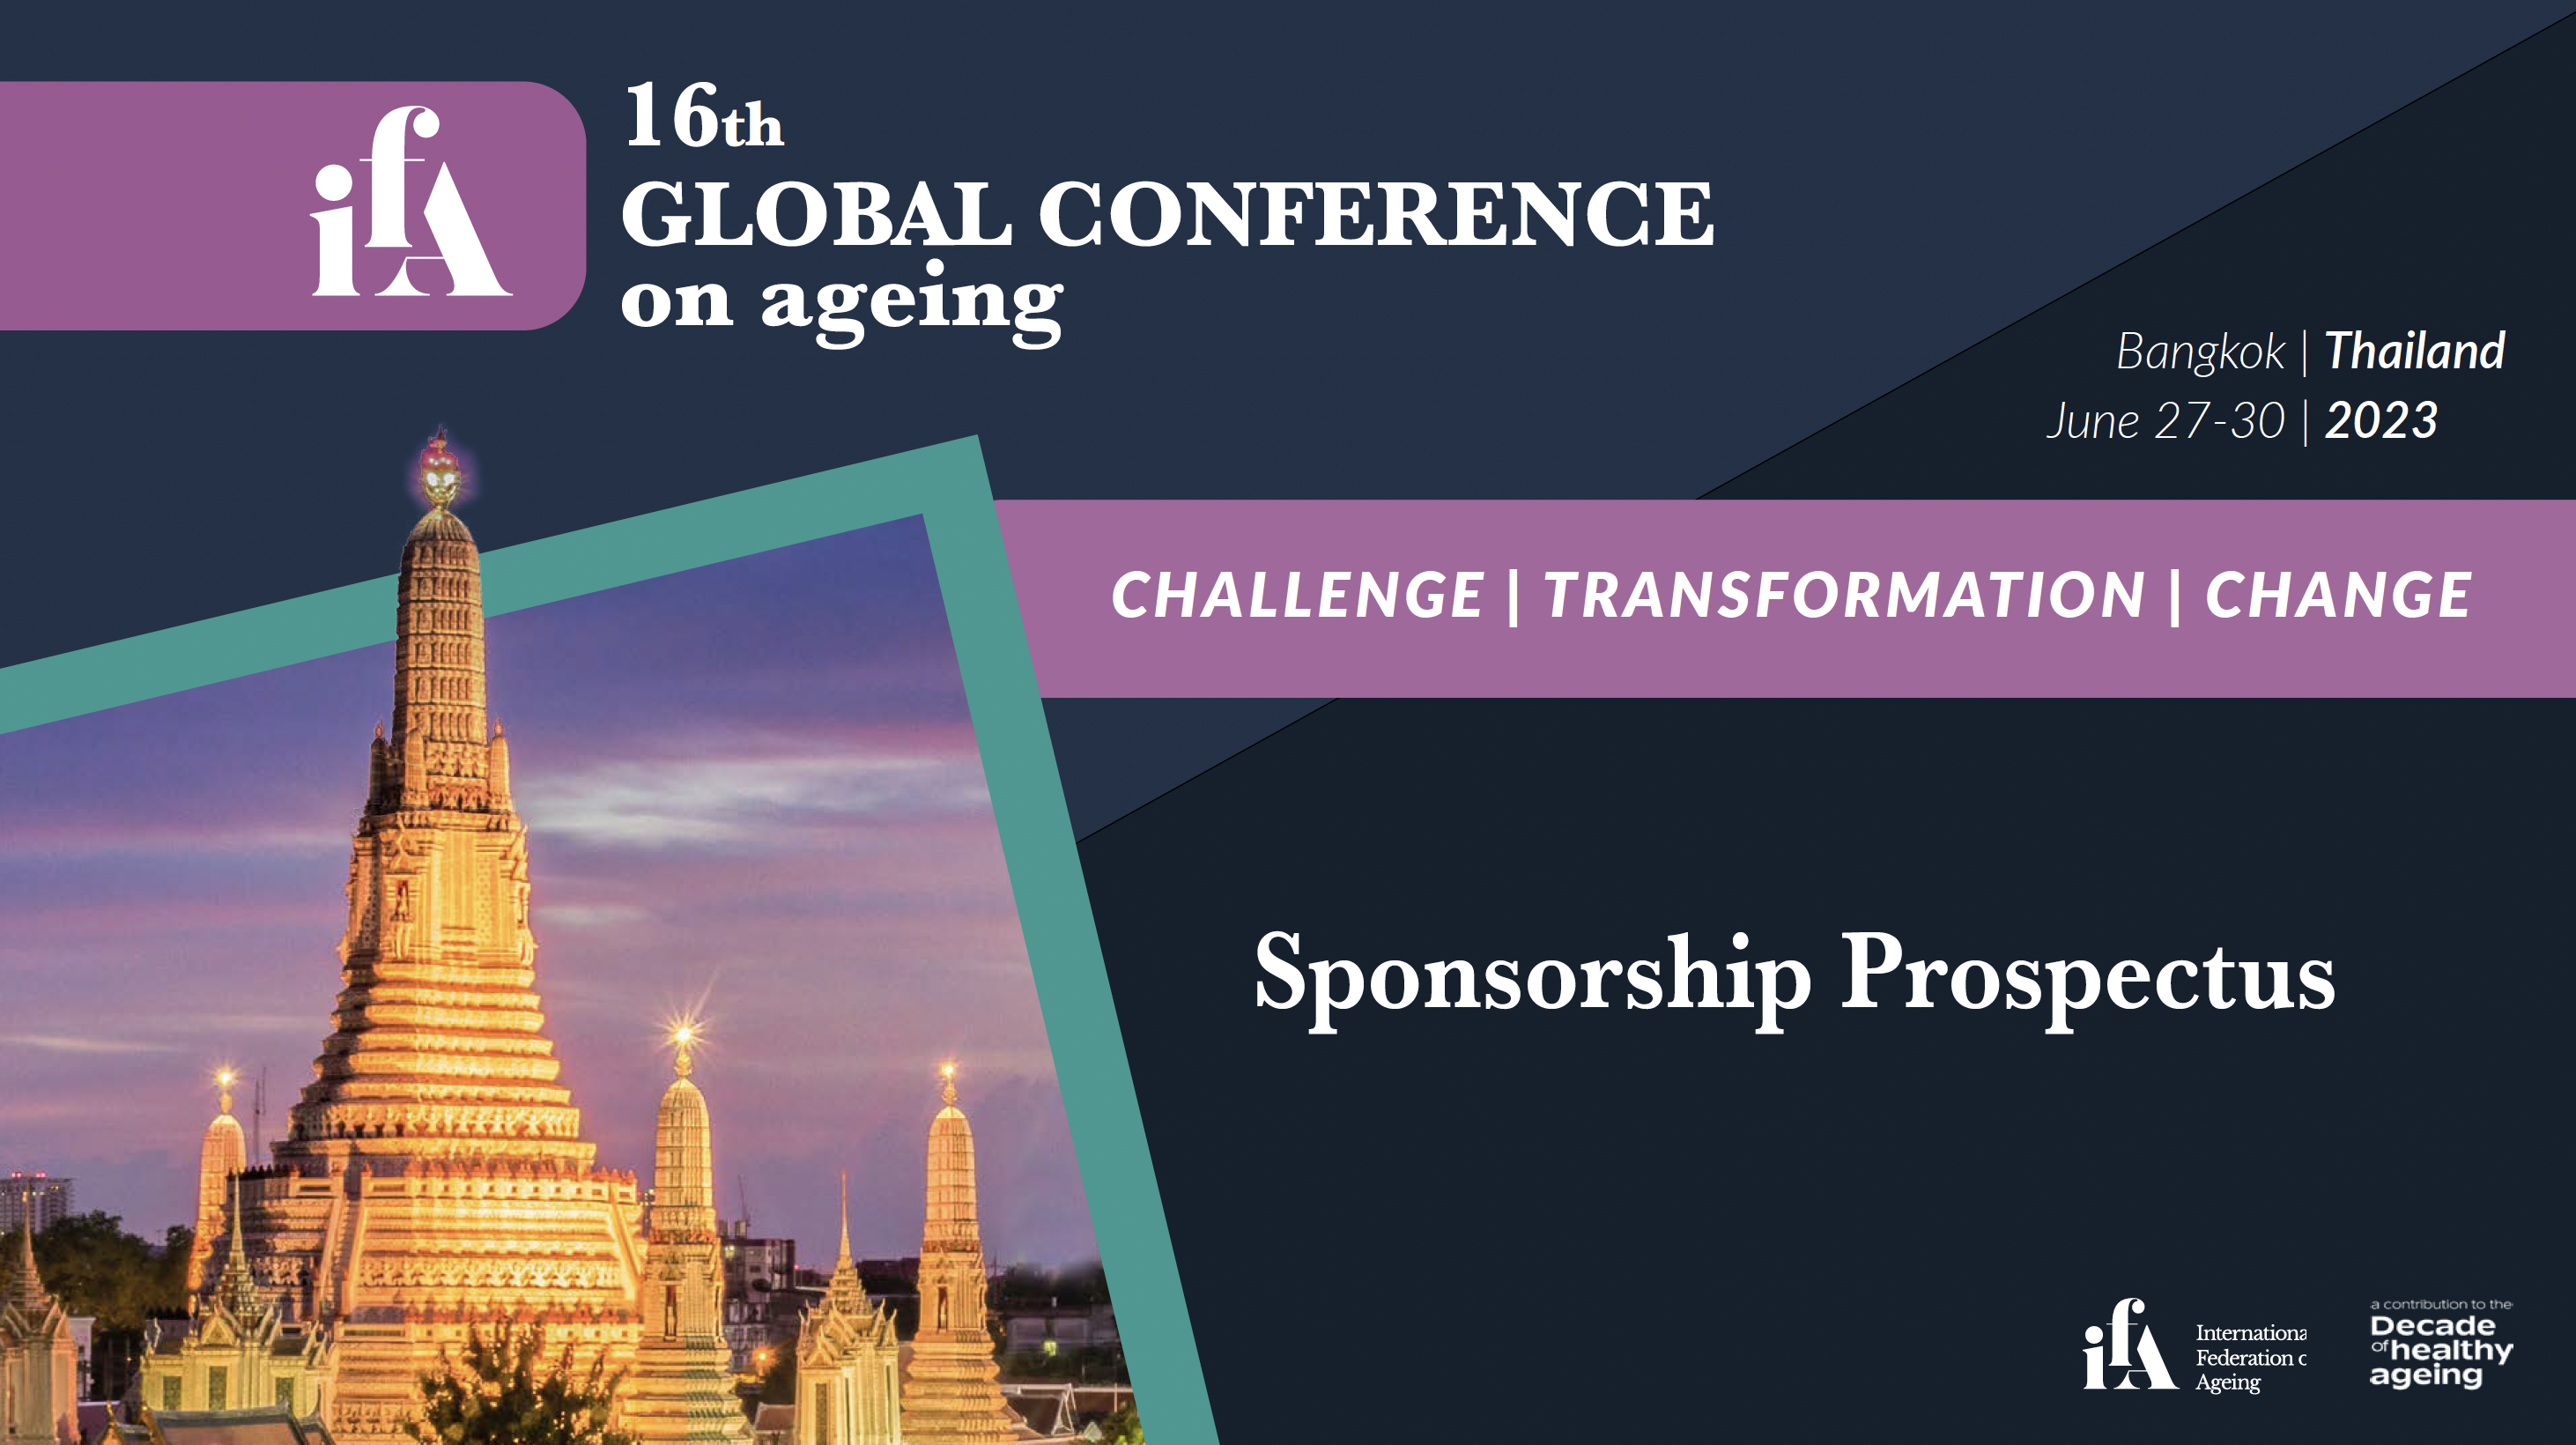 IFA 16th Global Conference on Ageing - Sponsorship Prospectus